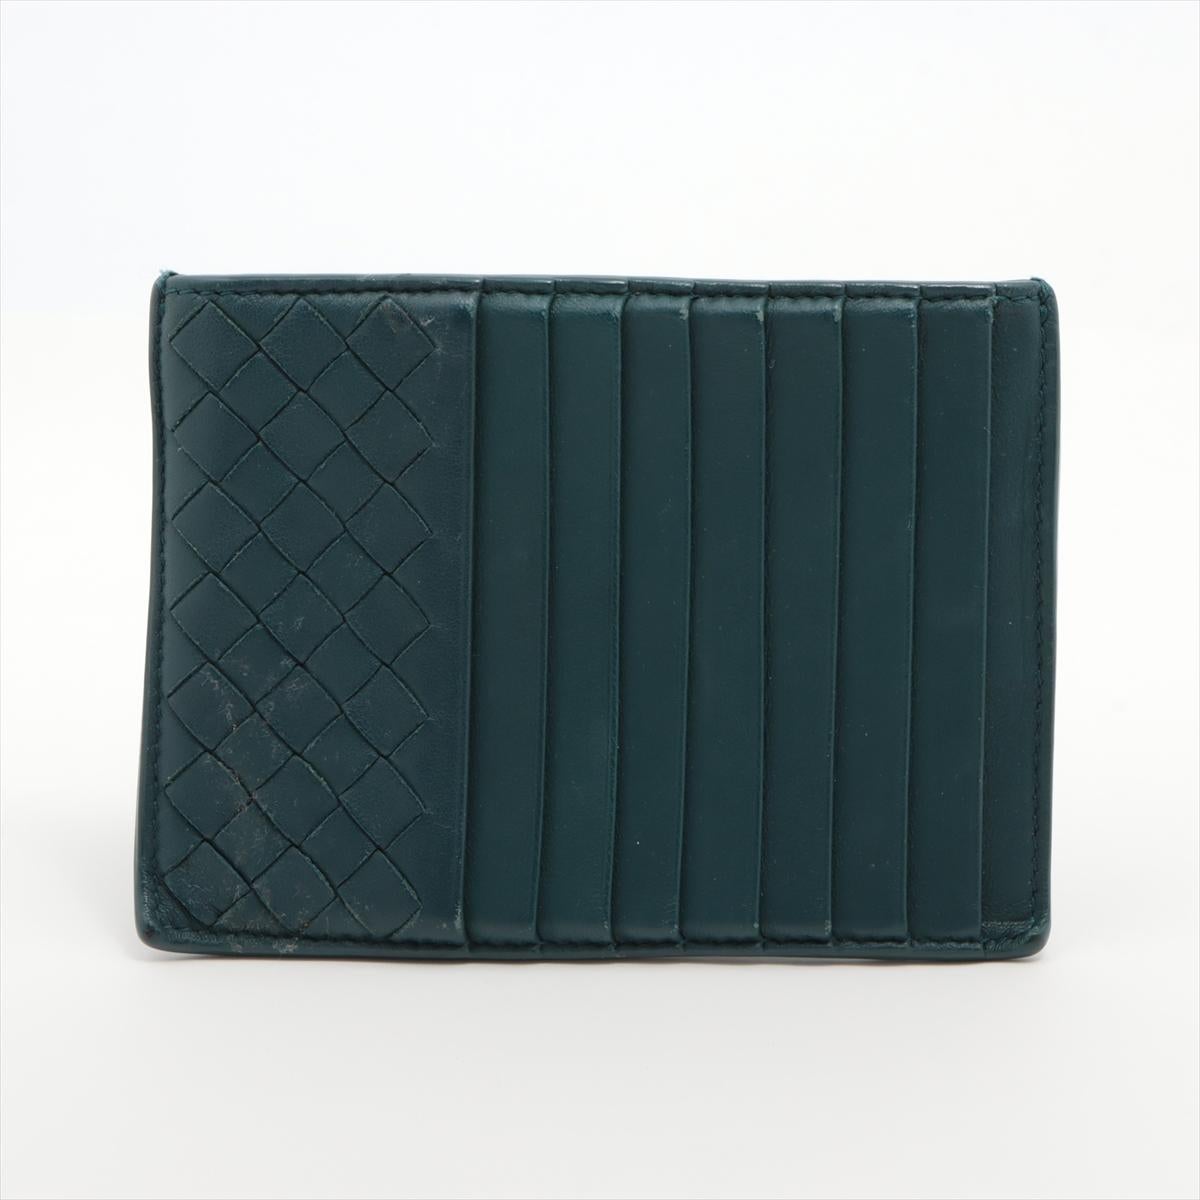 The Bottega Veneta Intrecciato Coin Card Case in Dark Green is a sleek and practical accessory crafted with the brand's signature Intrecciato weaving technique. Made from high-quality leather, the coin card case exudes luxury and sophistication. The